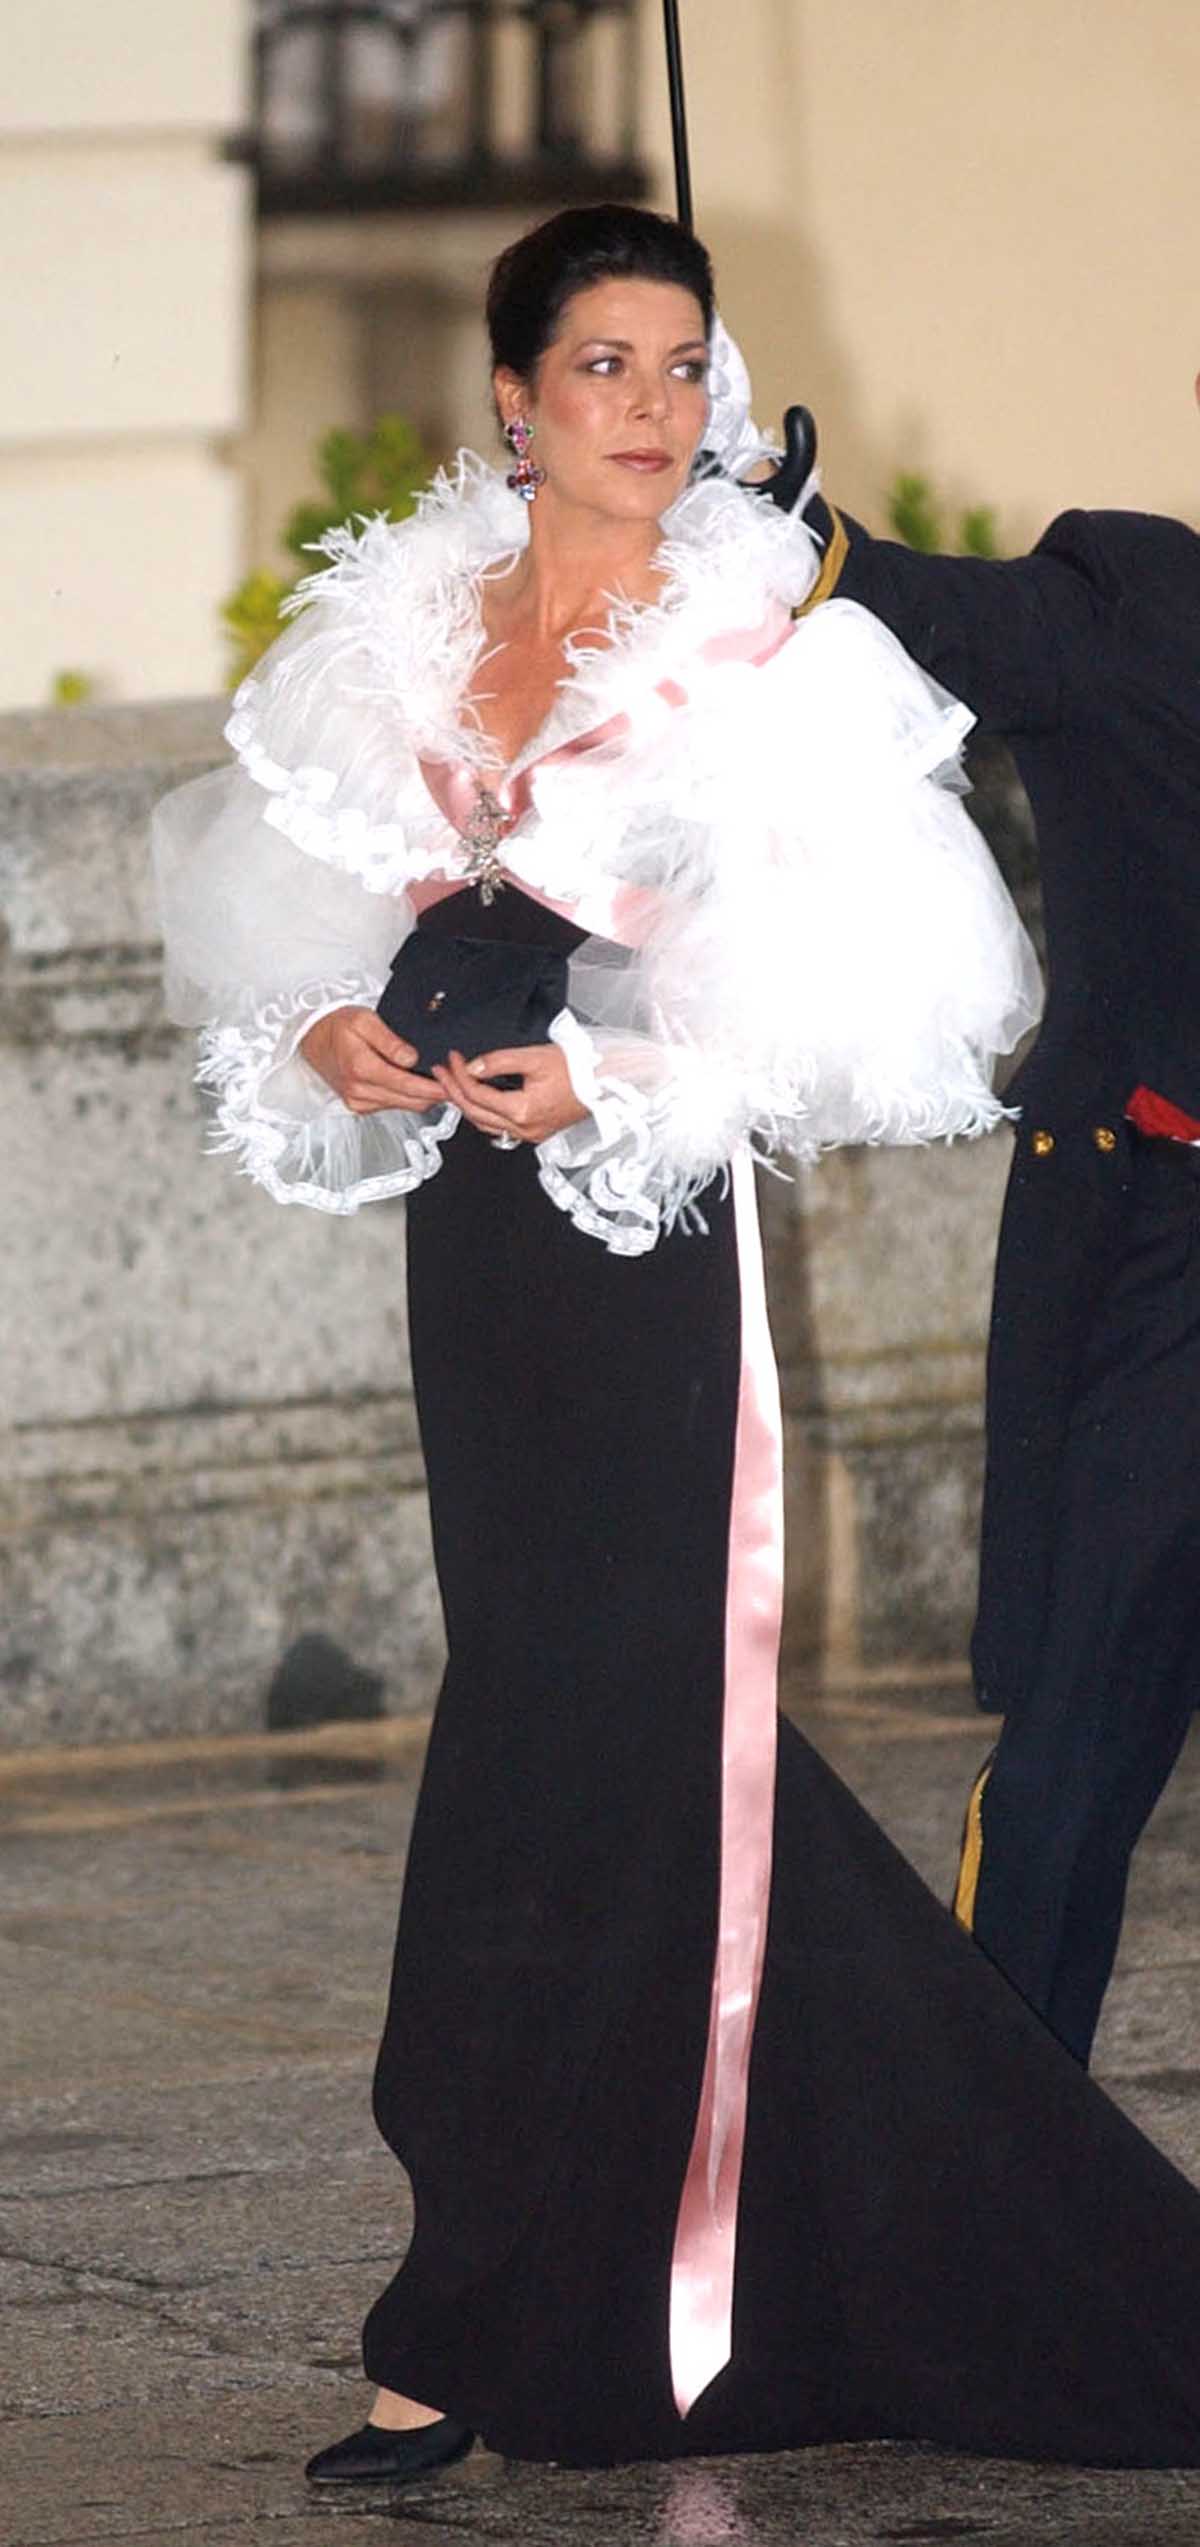 Princess Caroline of Monaco arrives at ThePardo Palace on the outskirts of Madrid, Friday May 21, 2004. The dinner was for guests attending the wedding of the Crown Prince Felipe and Letizia Ortiz scheduled for May 22.